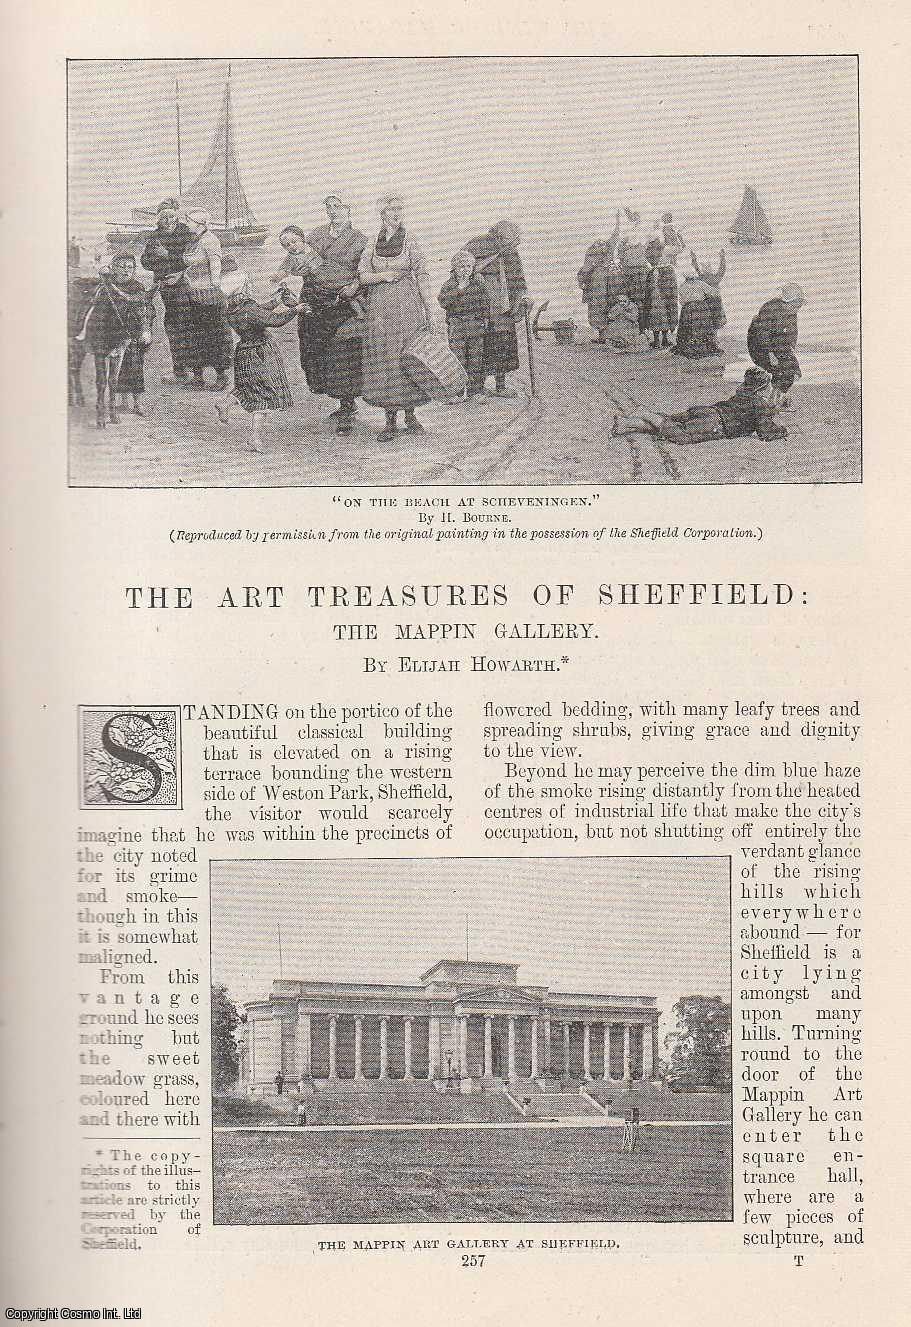 Elijah Howarth - The Art Treasures of Sheffield: The Mappin Gallery. An original article from the Windsor Magazine, 1895.